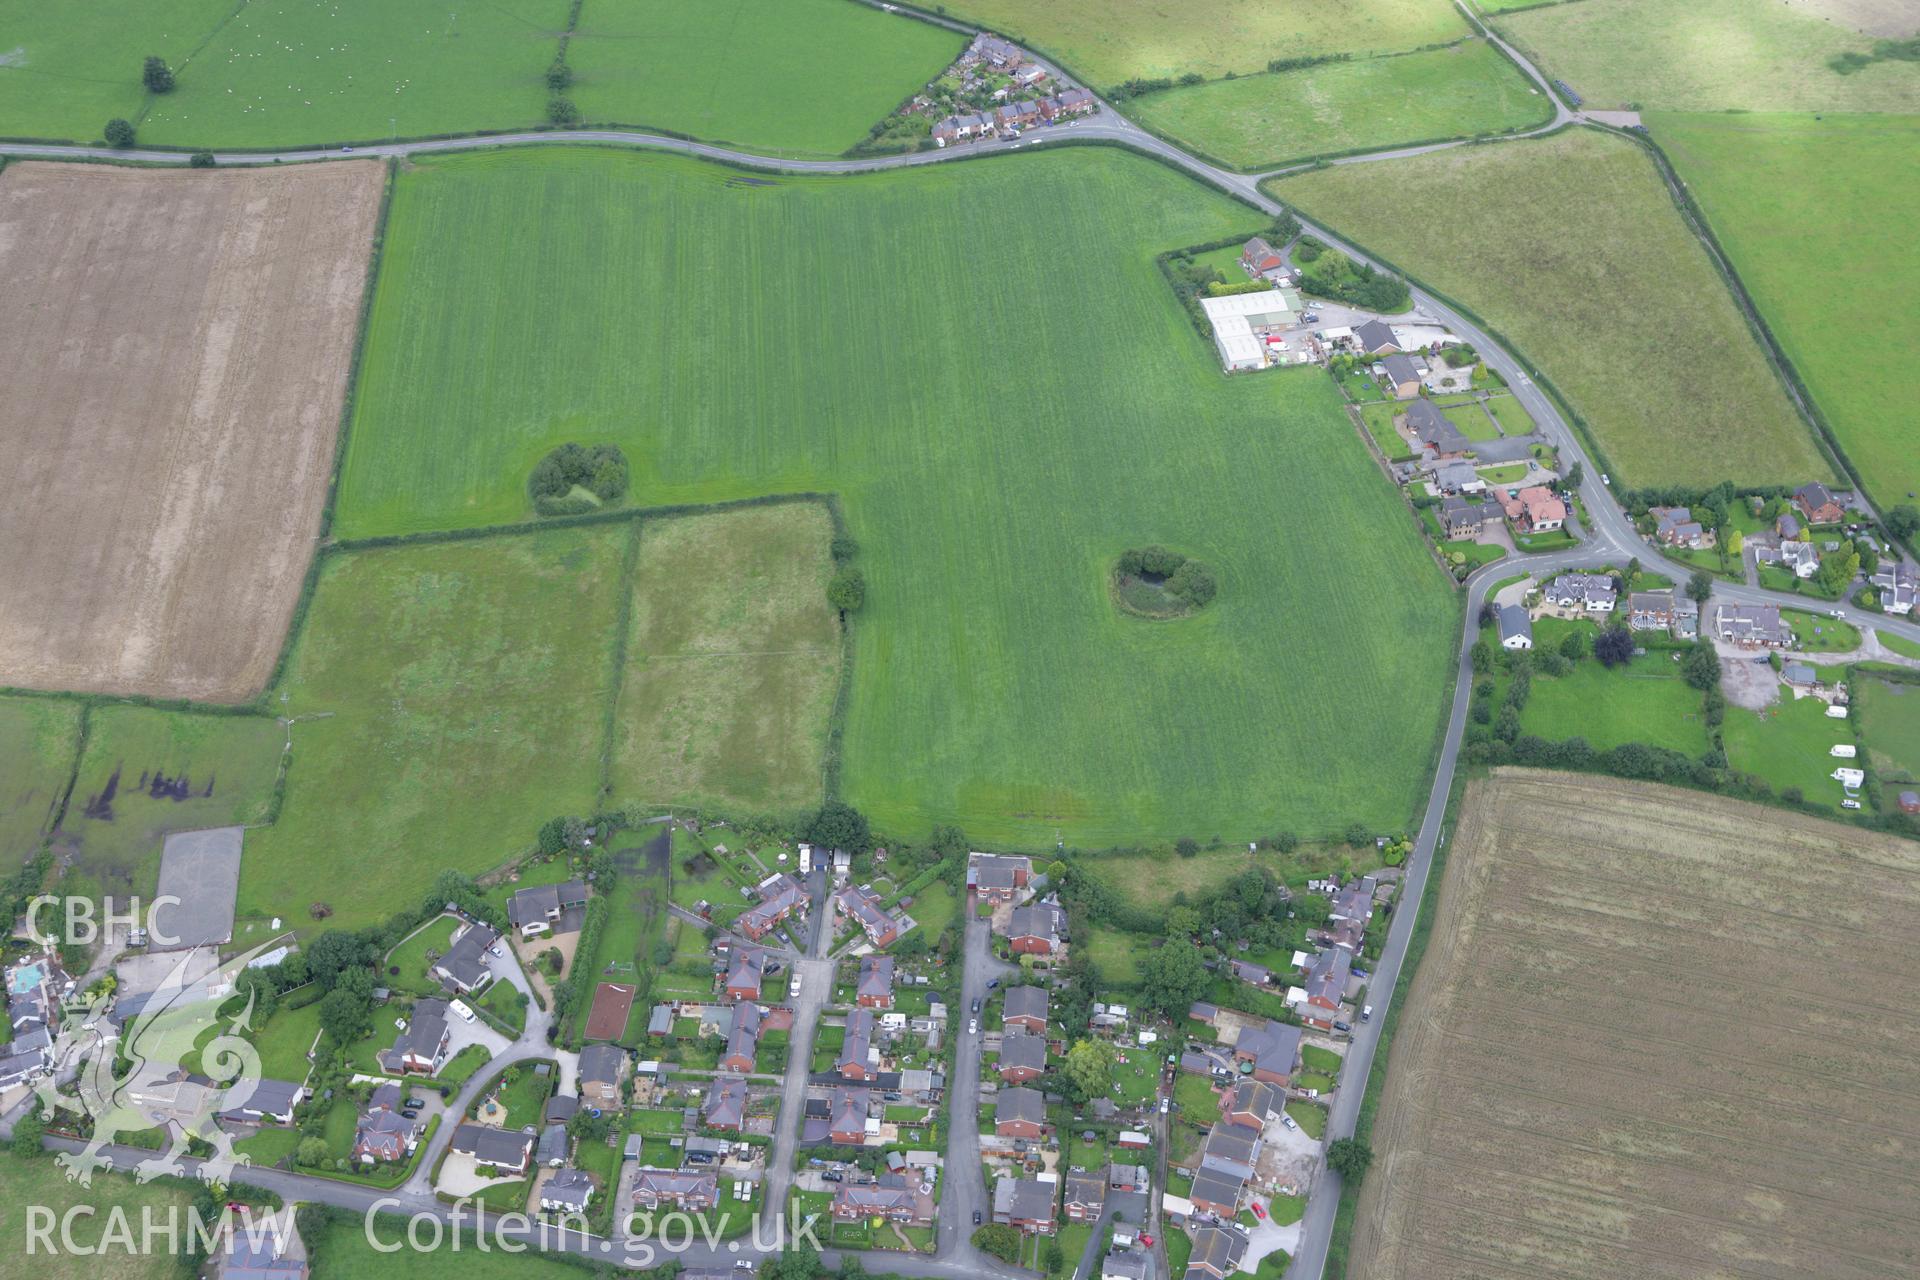 RCAHMW colour oblique aerial photograph of Trevalyn village, in general landscape view. Taken on 24 July 2007 by Toby Driver